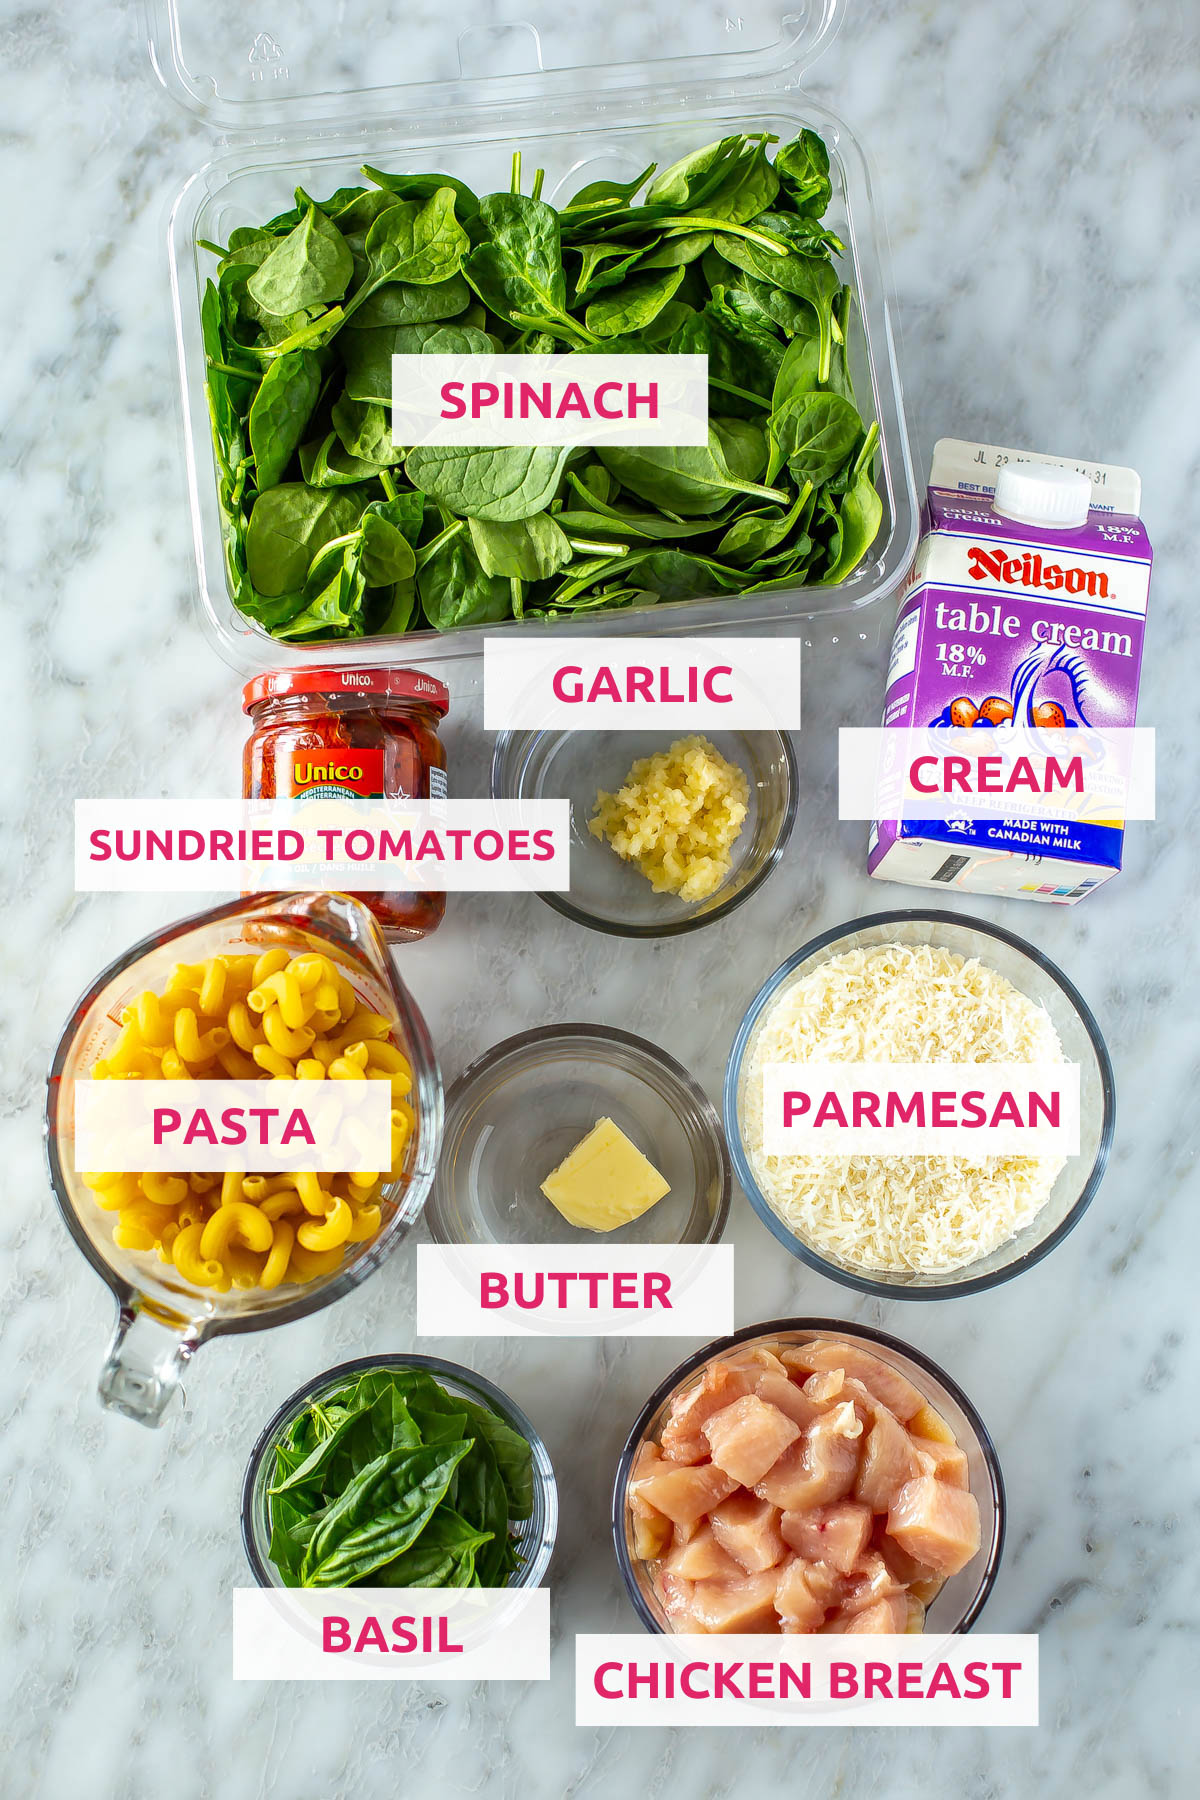 Ingredients for Creamy Sundried Tomato Pasta: sundried tomatoes, spinach, garlic, cream, pasta, butter, parmesan, basil and chicken breast.